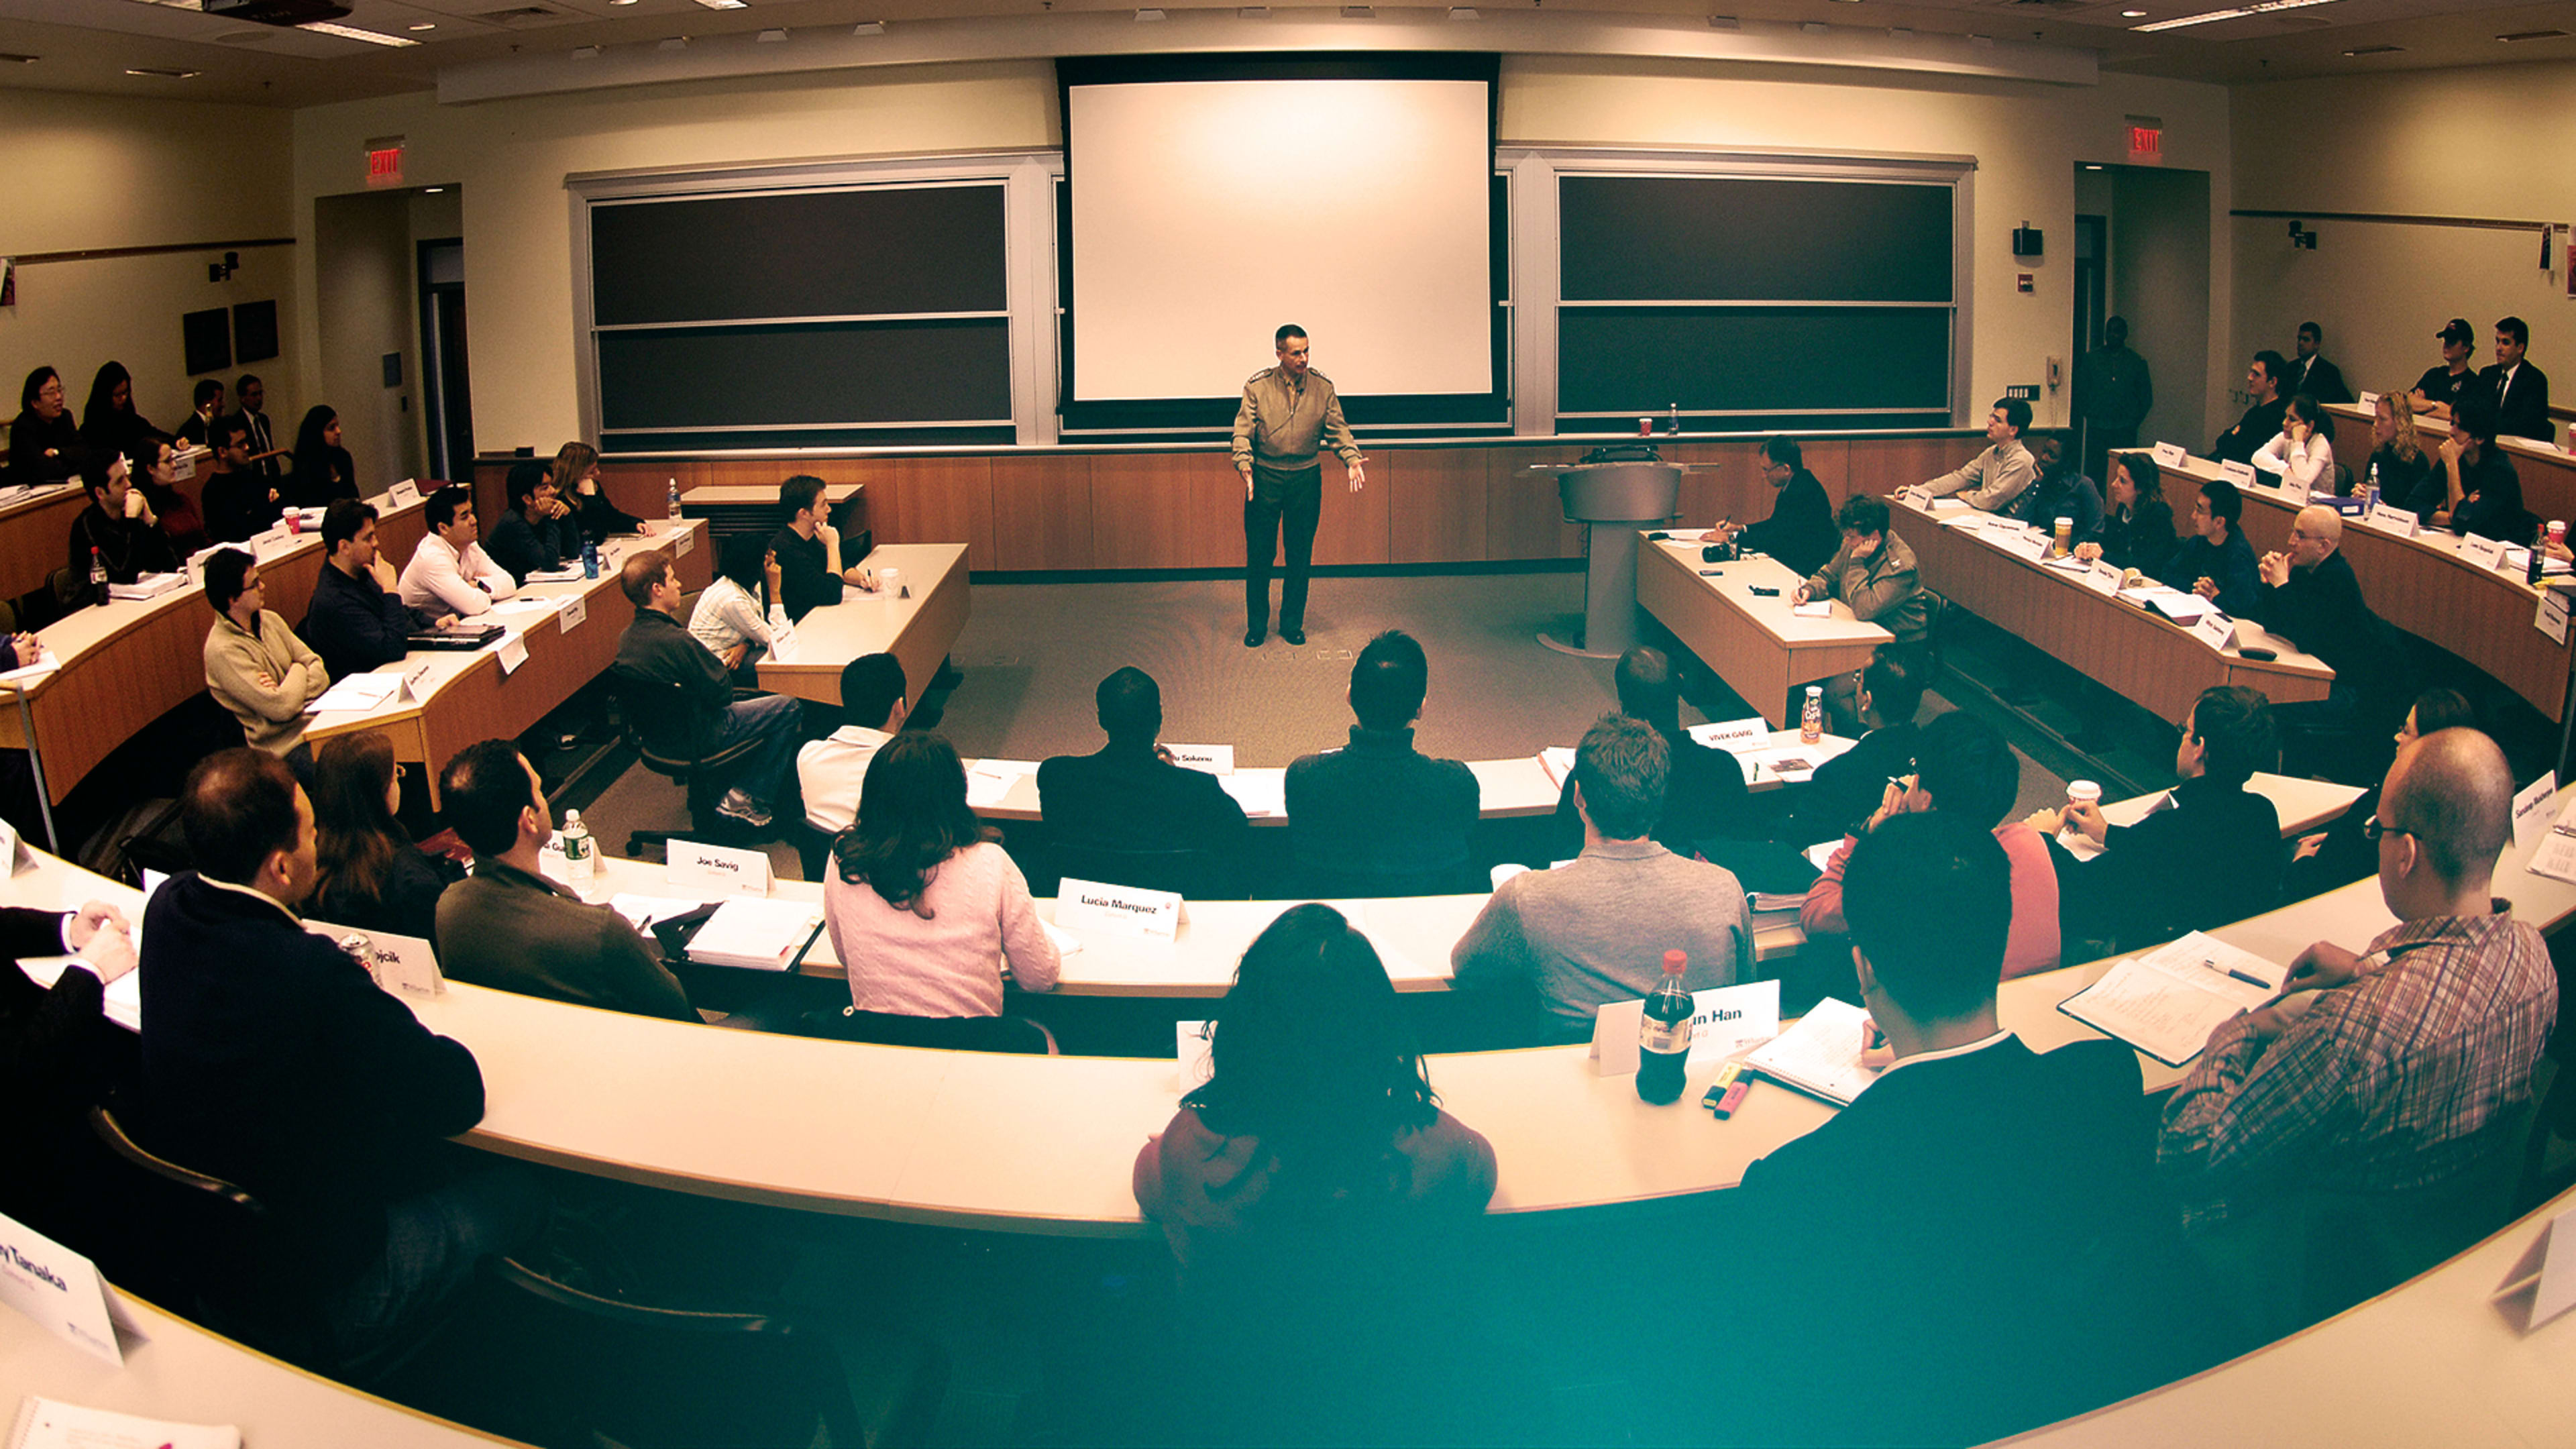 Can Business Schools Make Companies Ethical?